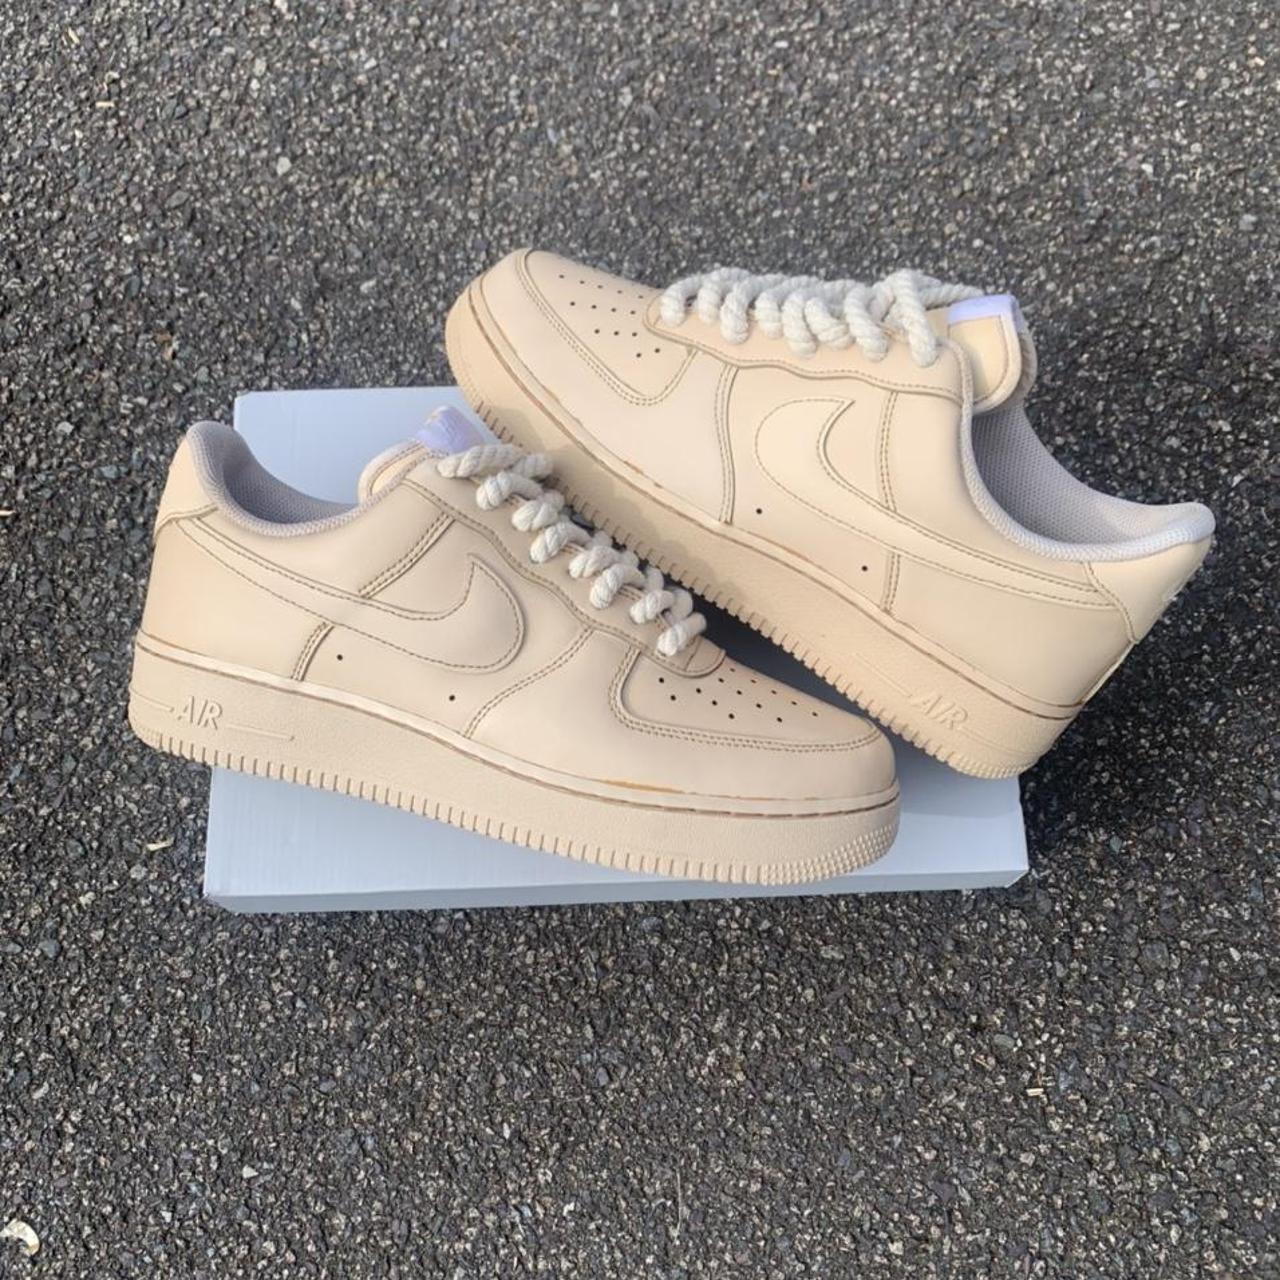 Coffee color nike air force 1  Sneakers nike, Nike shoes, Painted